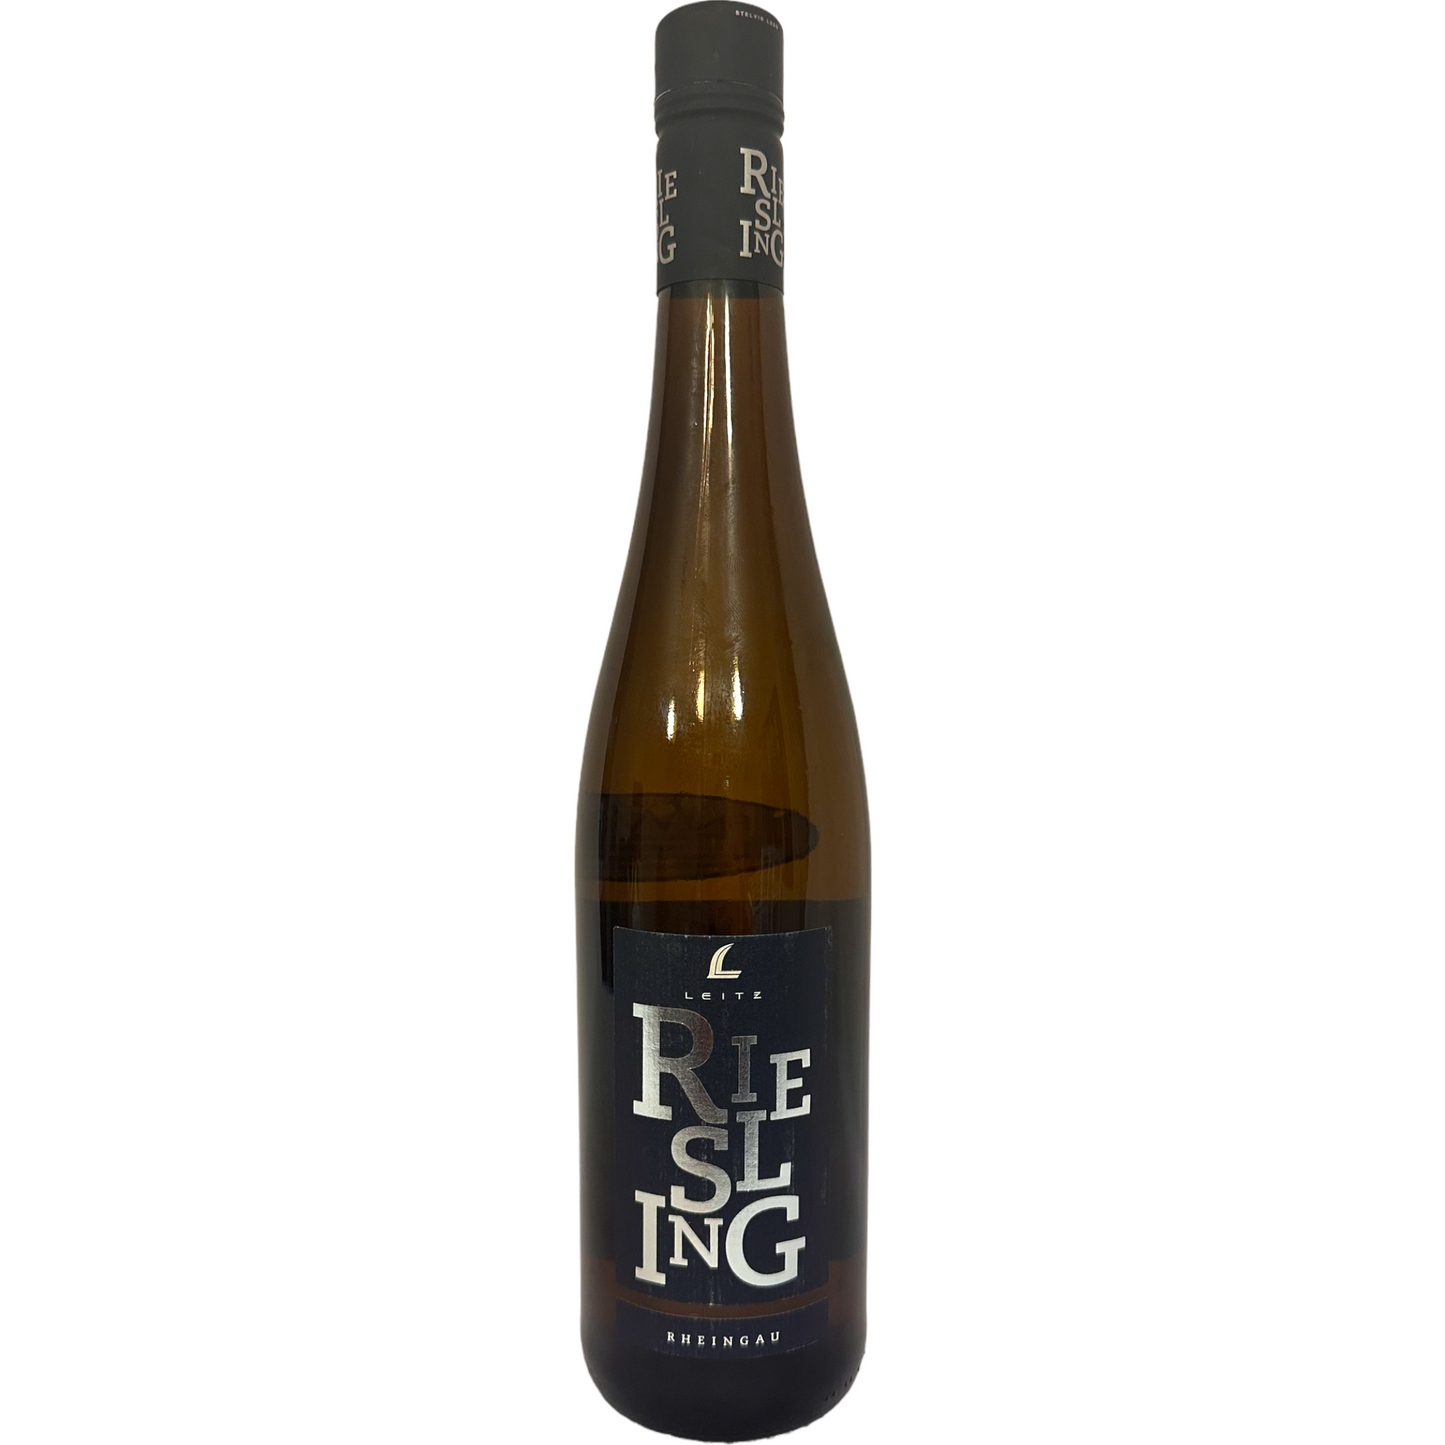 LEITZ BLUE LABEL RIESLING